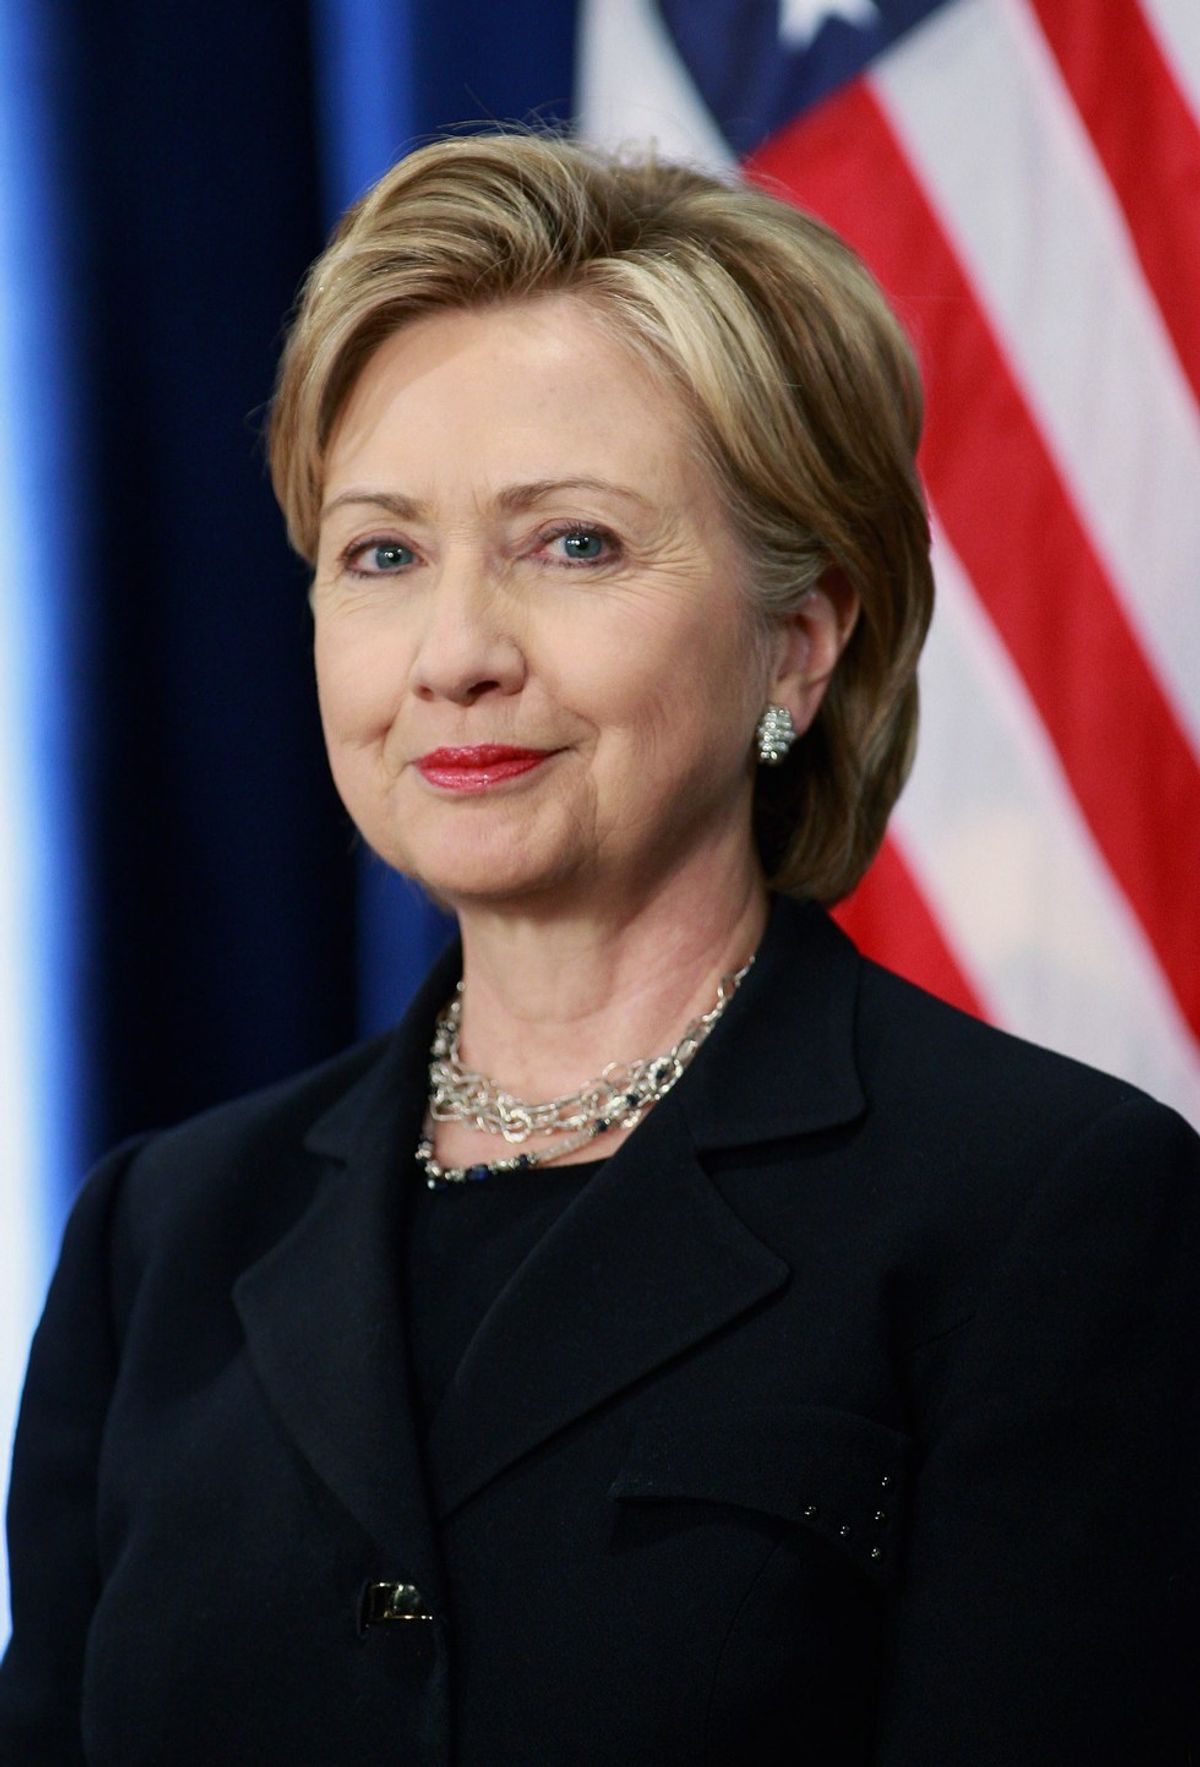 5 Reasons Hillary Clinton Could Be Our Next President